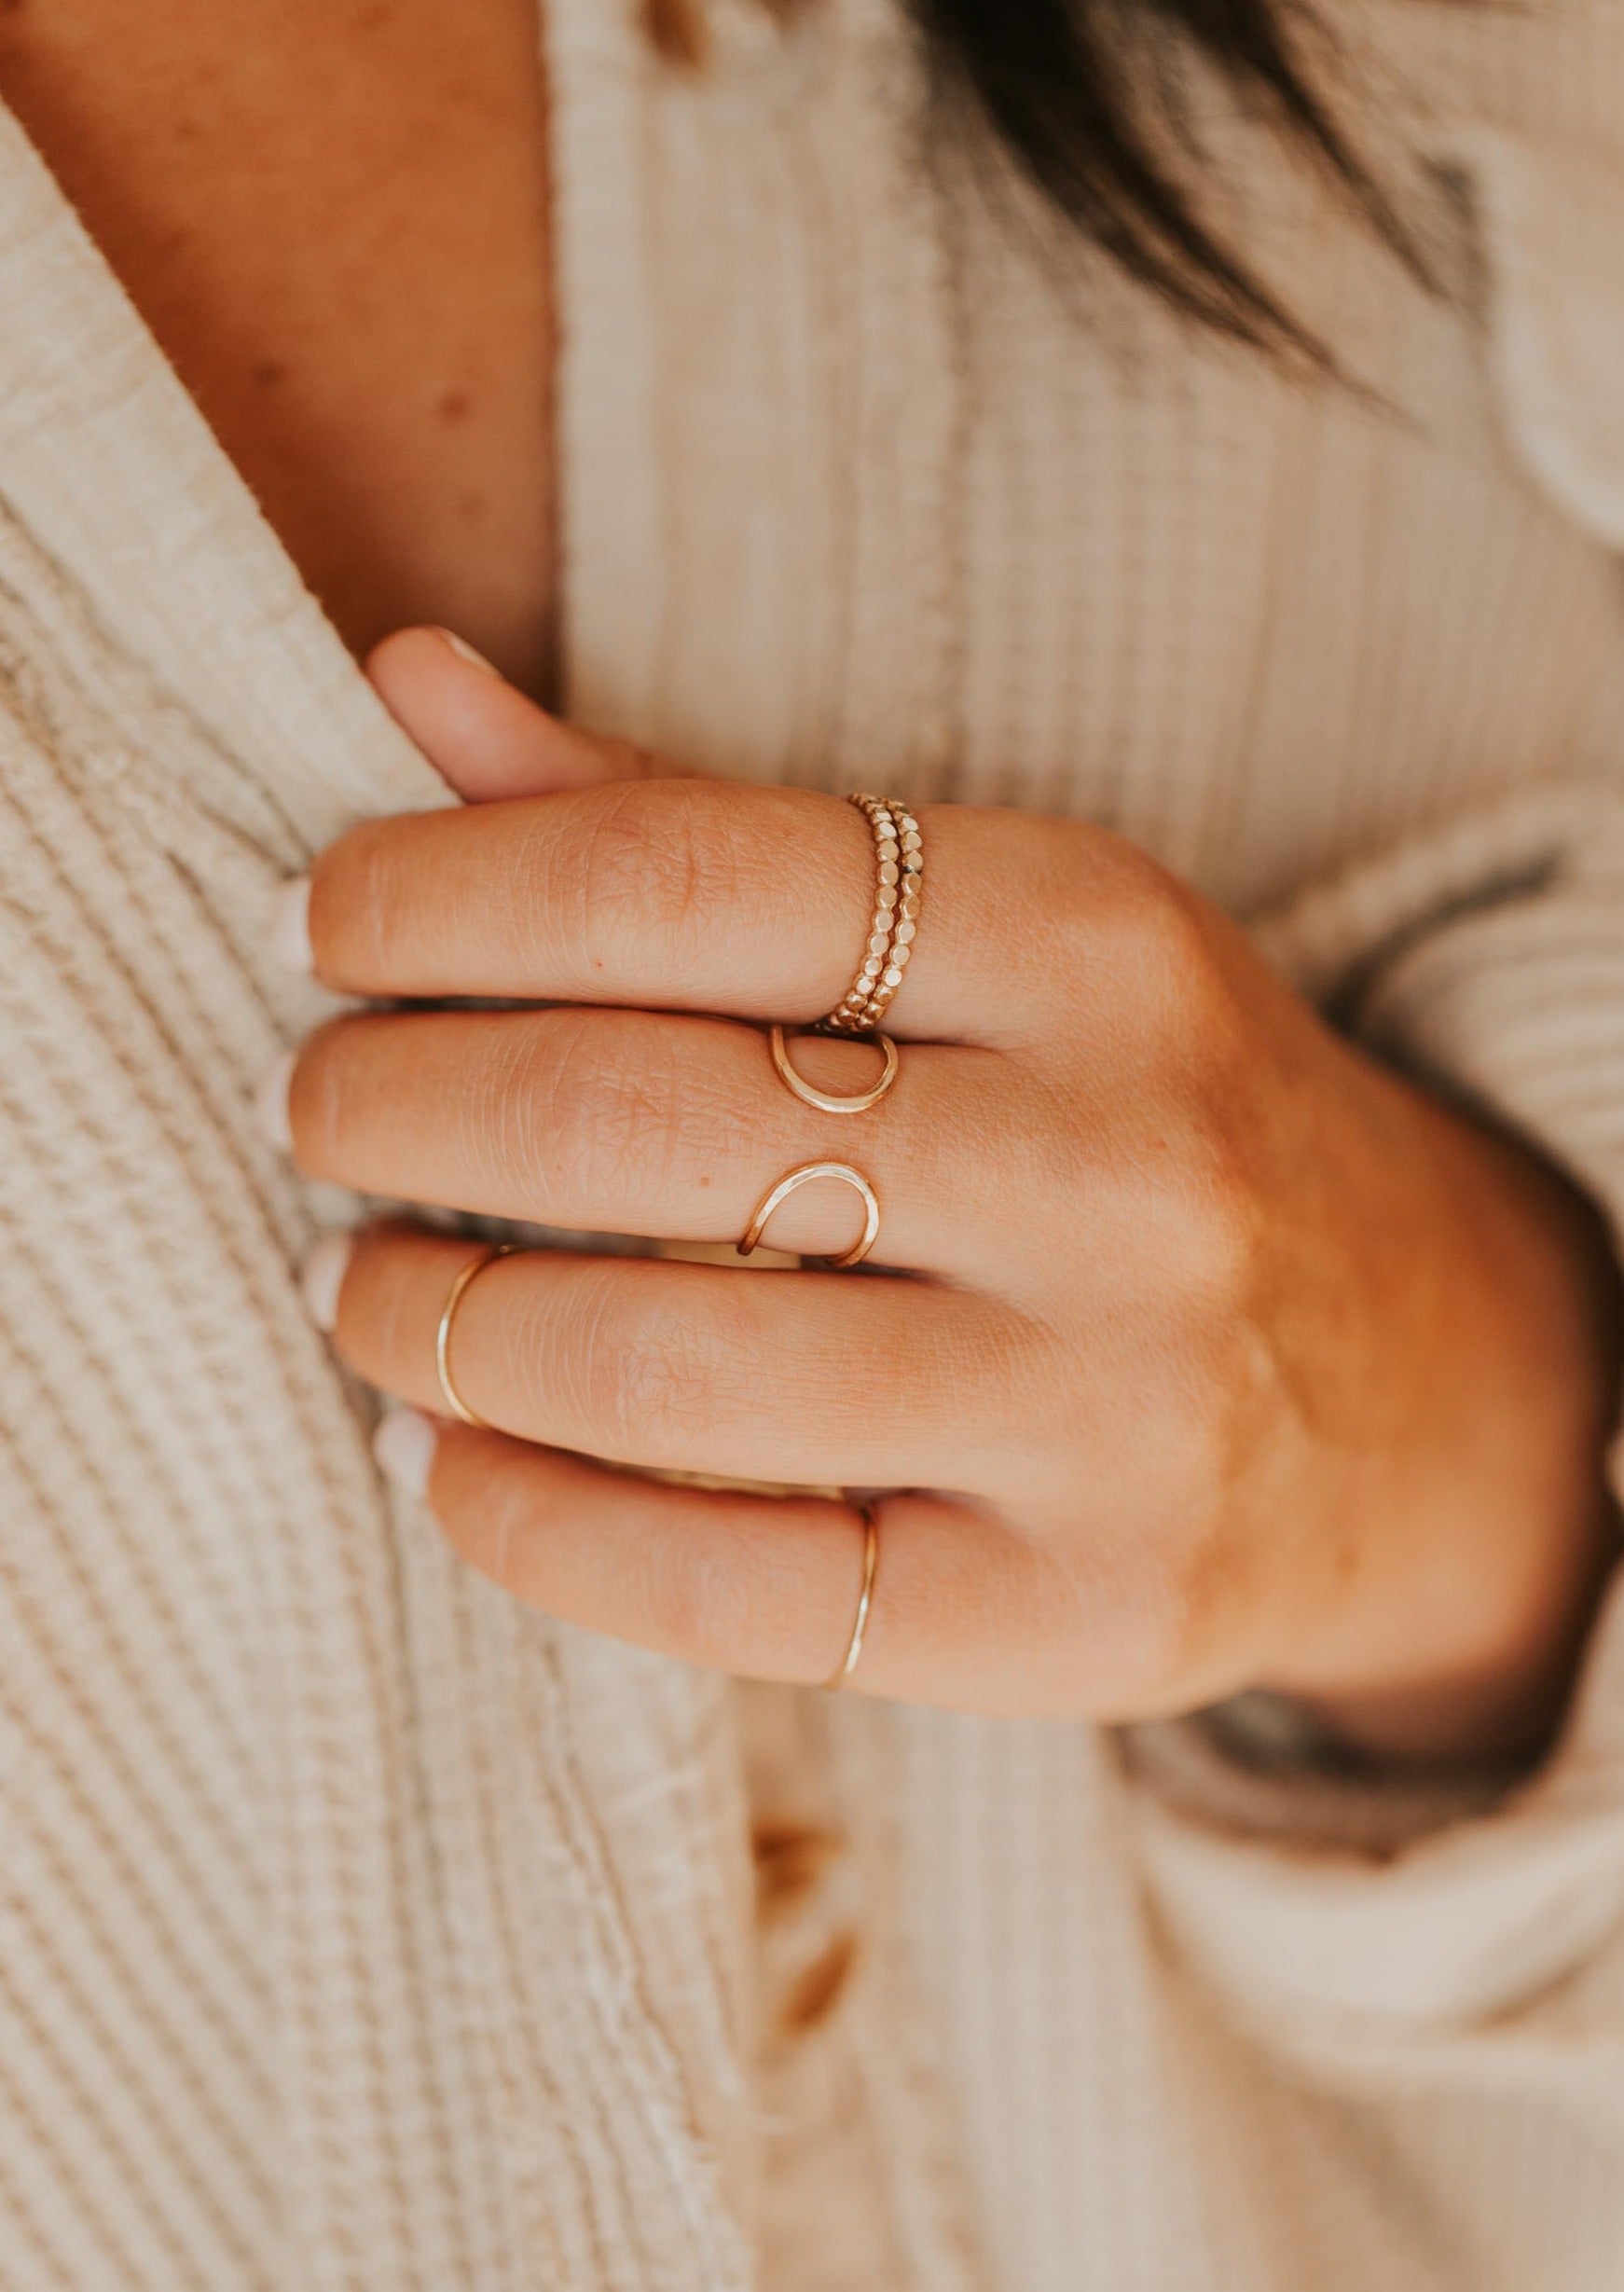 Simple Rings, Minimalist Ring, Rose Gold Stack Rings, Thin Gold Bands, Size 10 Woman Rings, Rings for Women, Thumb Ring | Bliss Ring